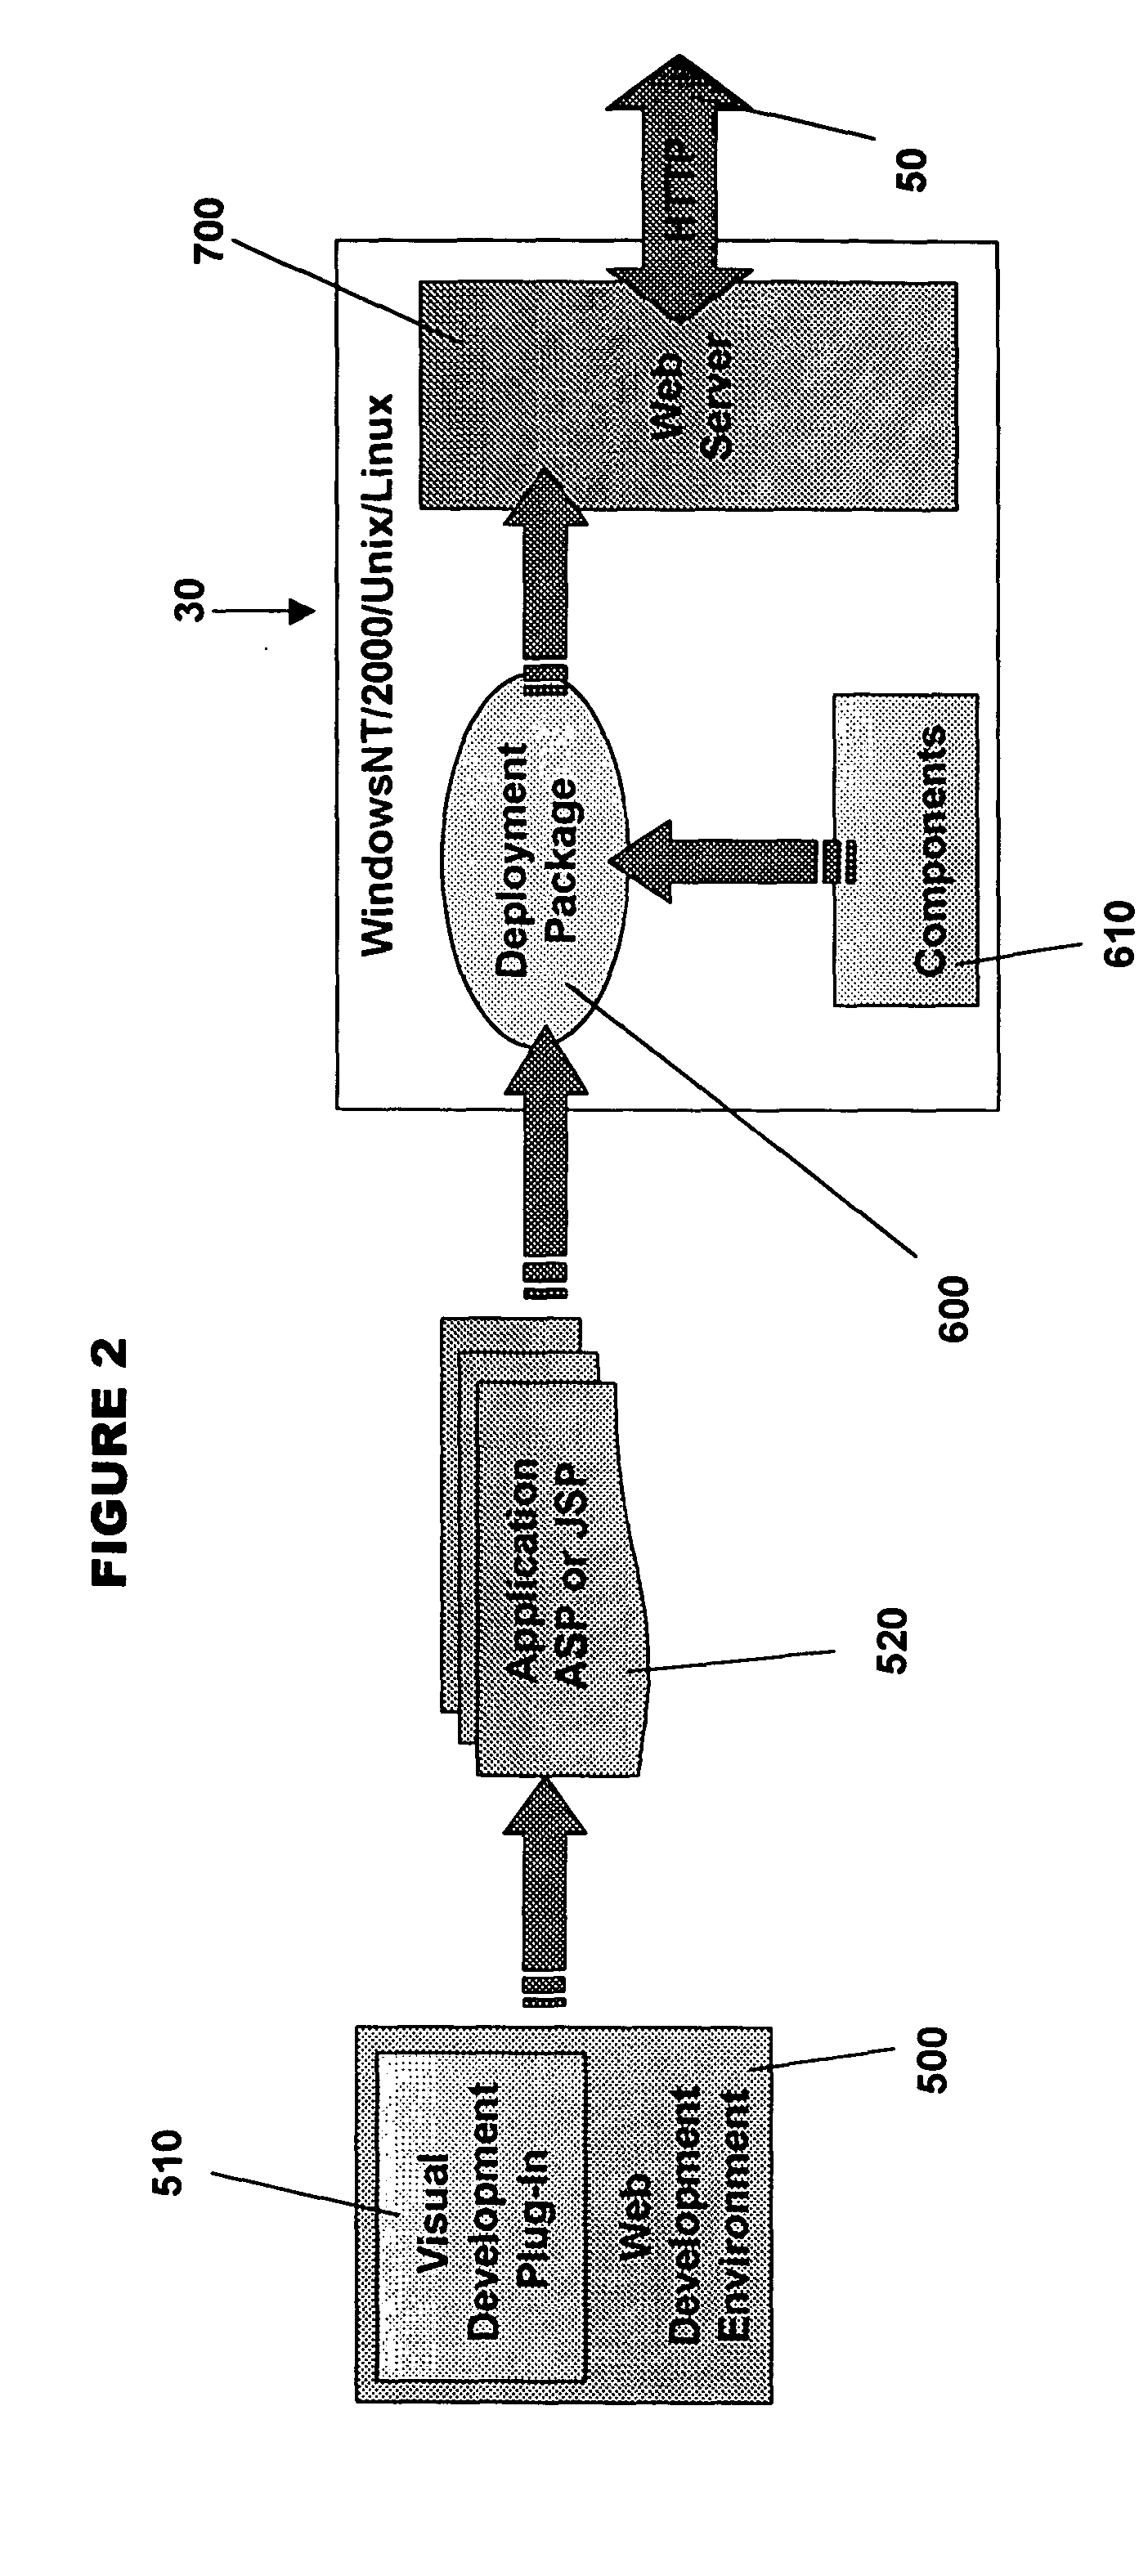 System and method for transfer, control, and synchronization of data